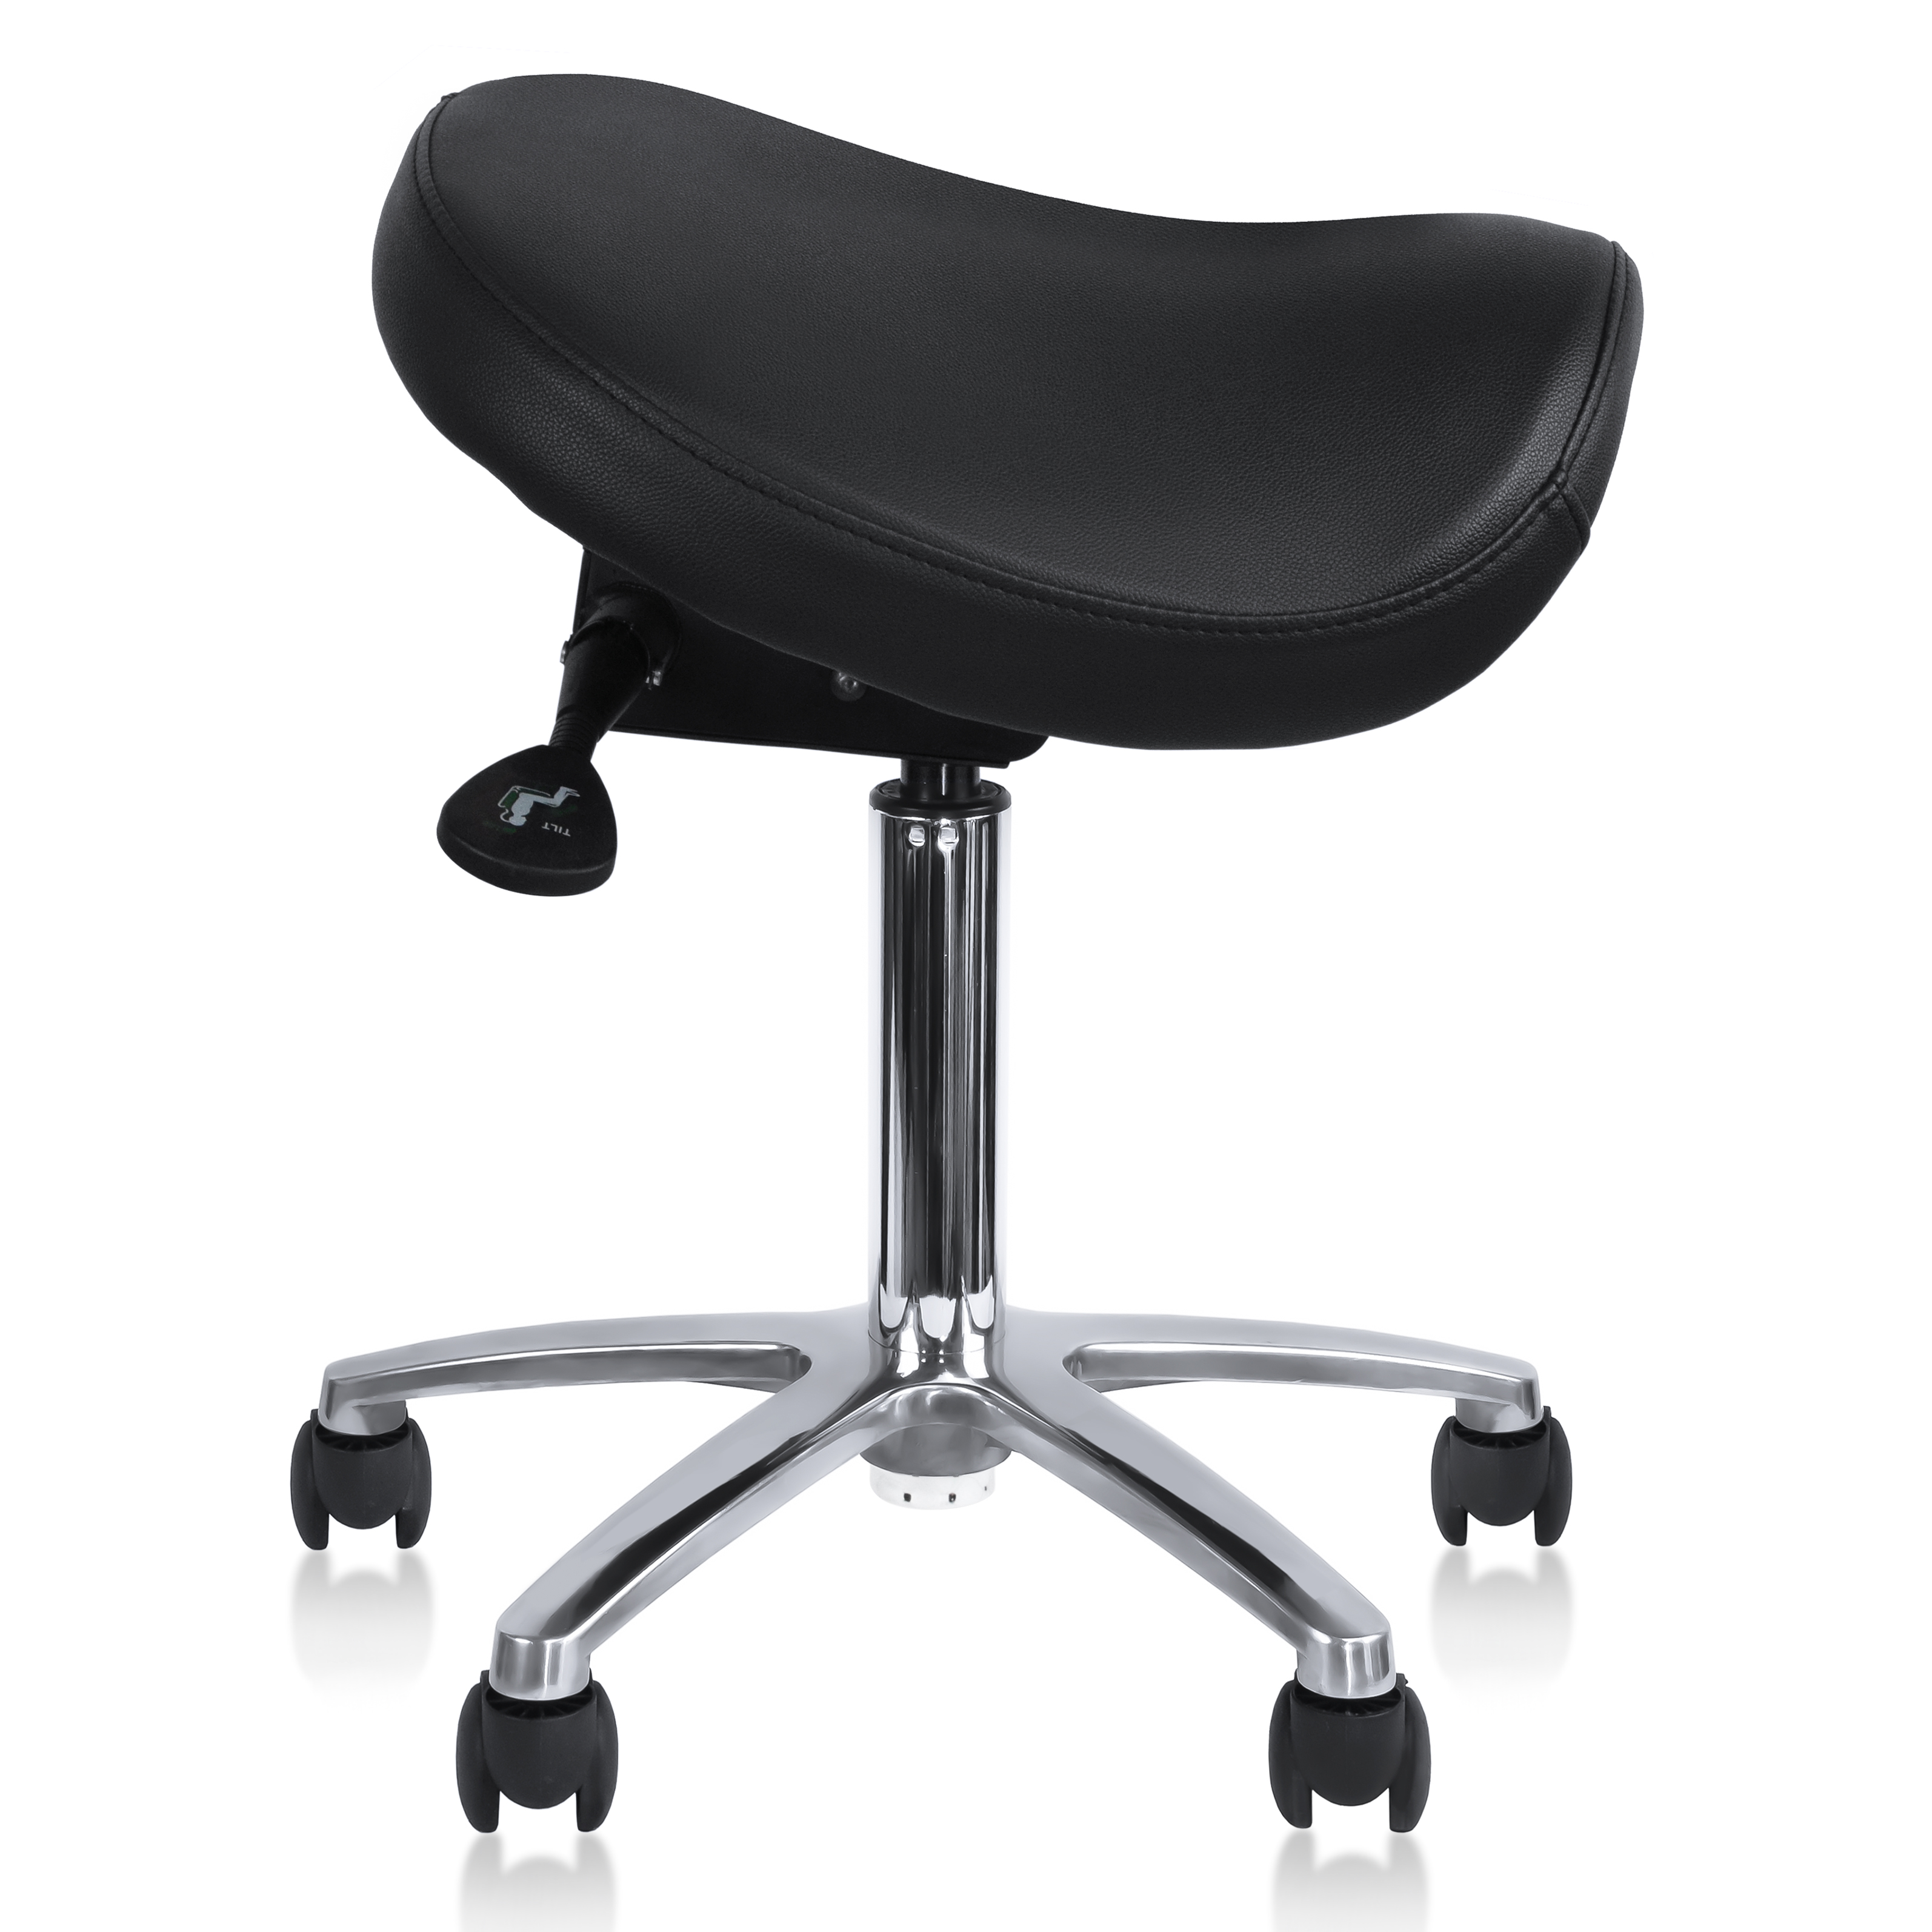 Rolling Stool Chair with Lumbar Support - Black - Pace by Harmony Collection